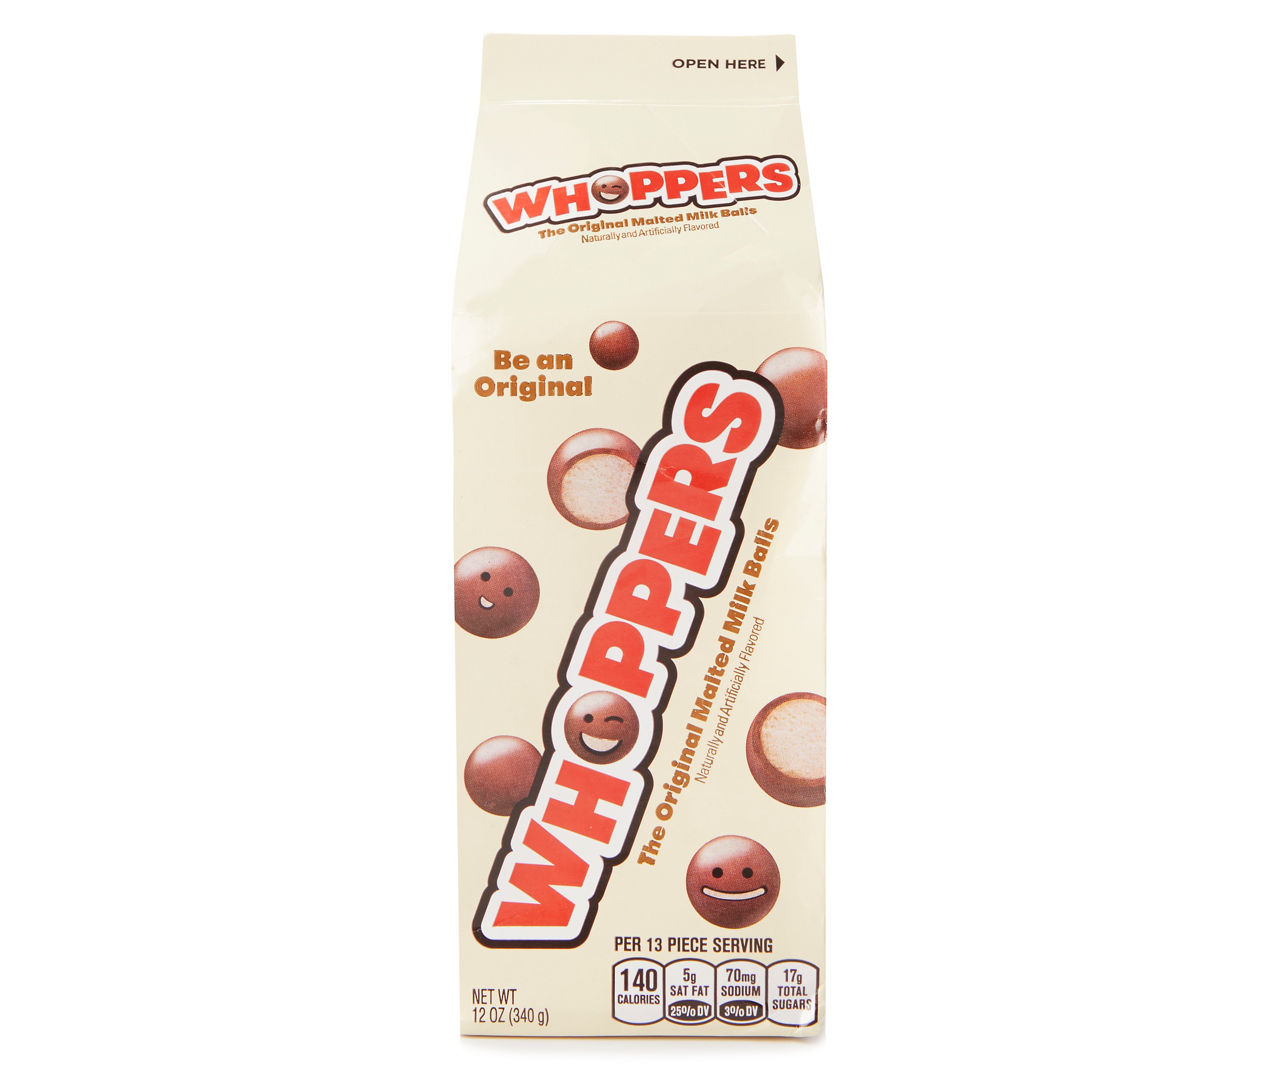 WHOPPERS Malted Milk Balls, (12-Ounce Carton, Pack of 6) : :  Grocery & Gourmet Food